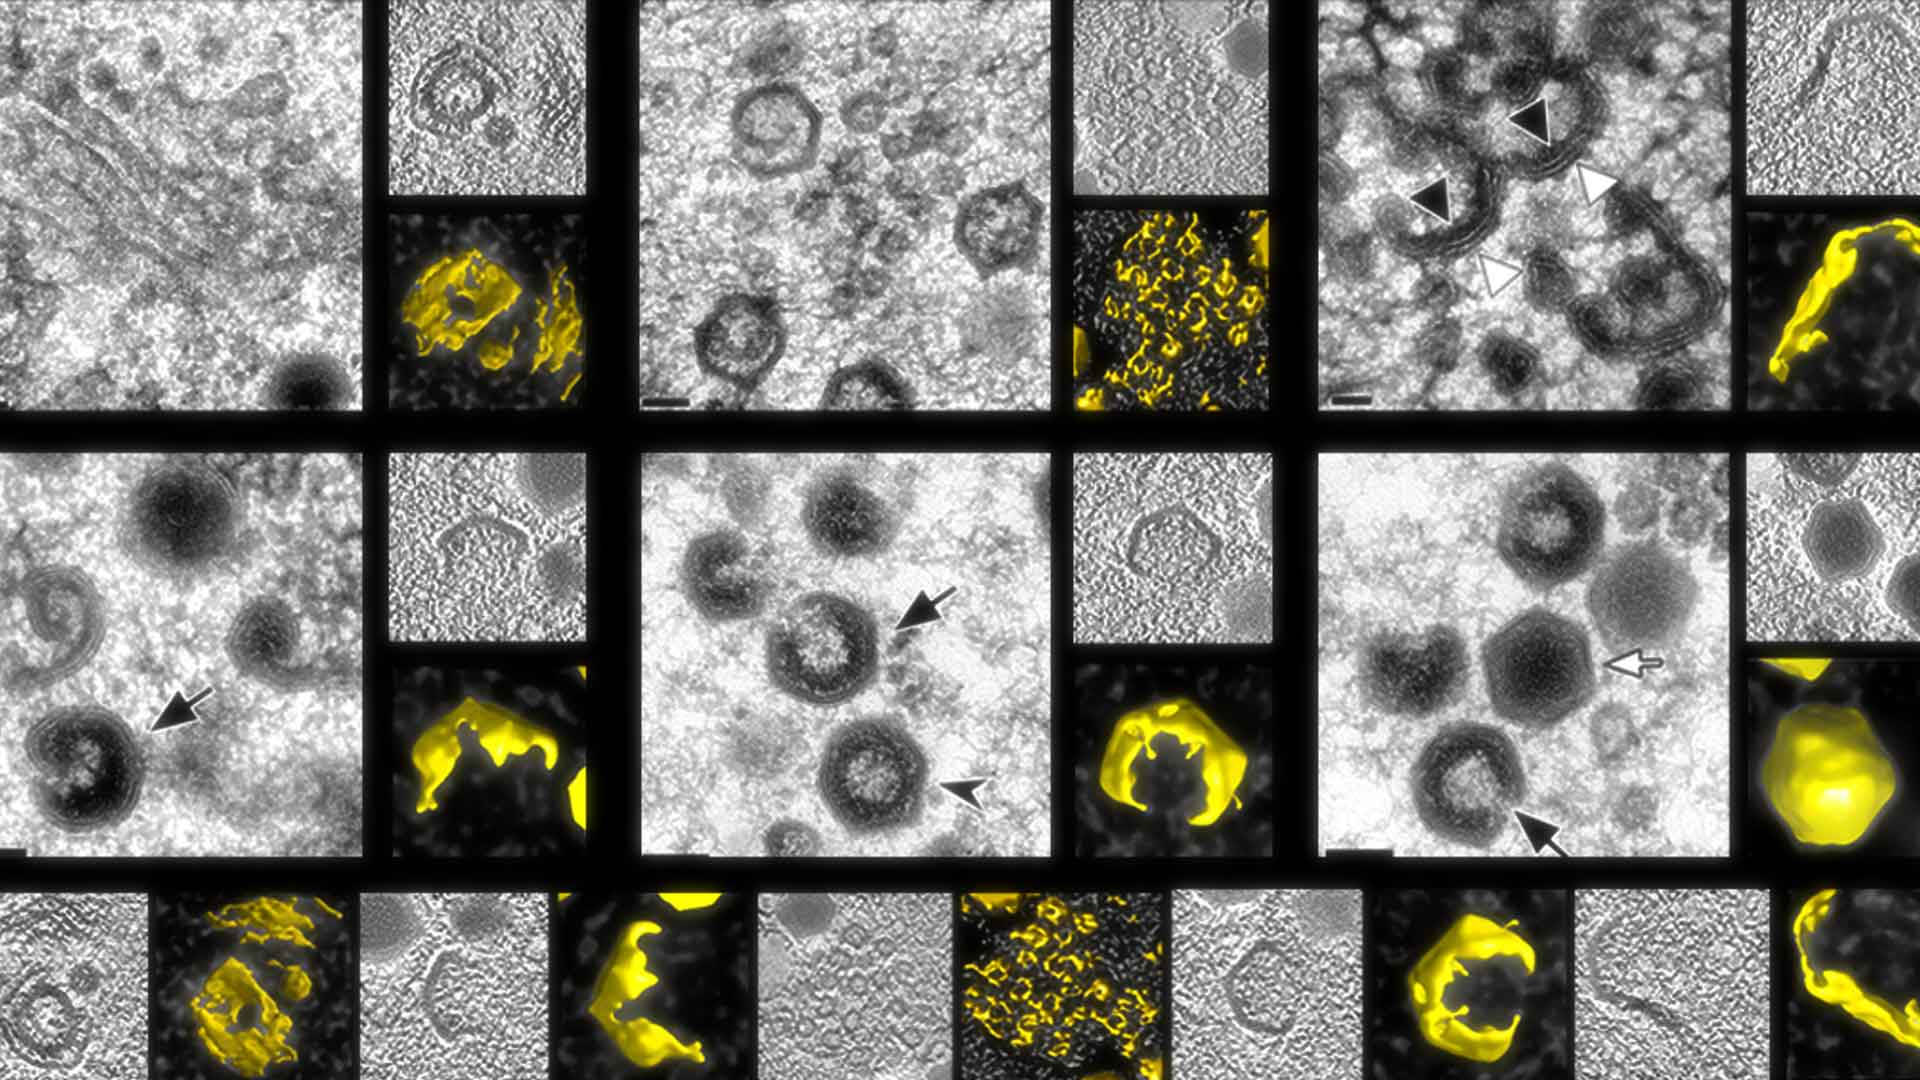 VISUALIZATION OF ASSEMBLY INTERMEDIATES AND BUDDING VACUOLES OF SINGAPORE GROUPER IRIDOVIRUS IN GROUPER EMBRYONIC CELLS